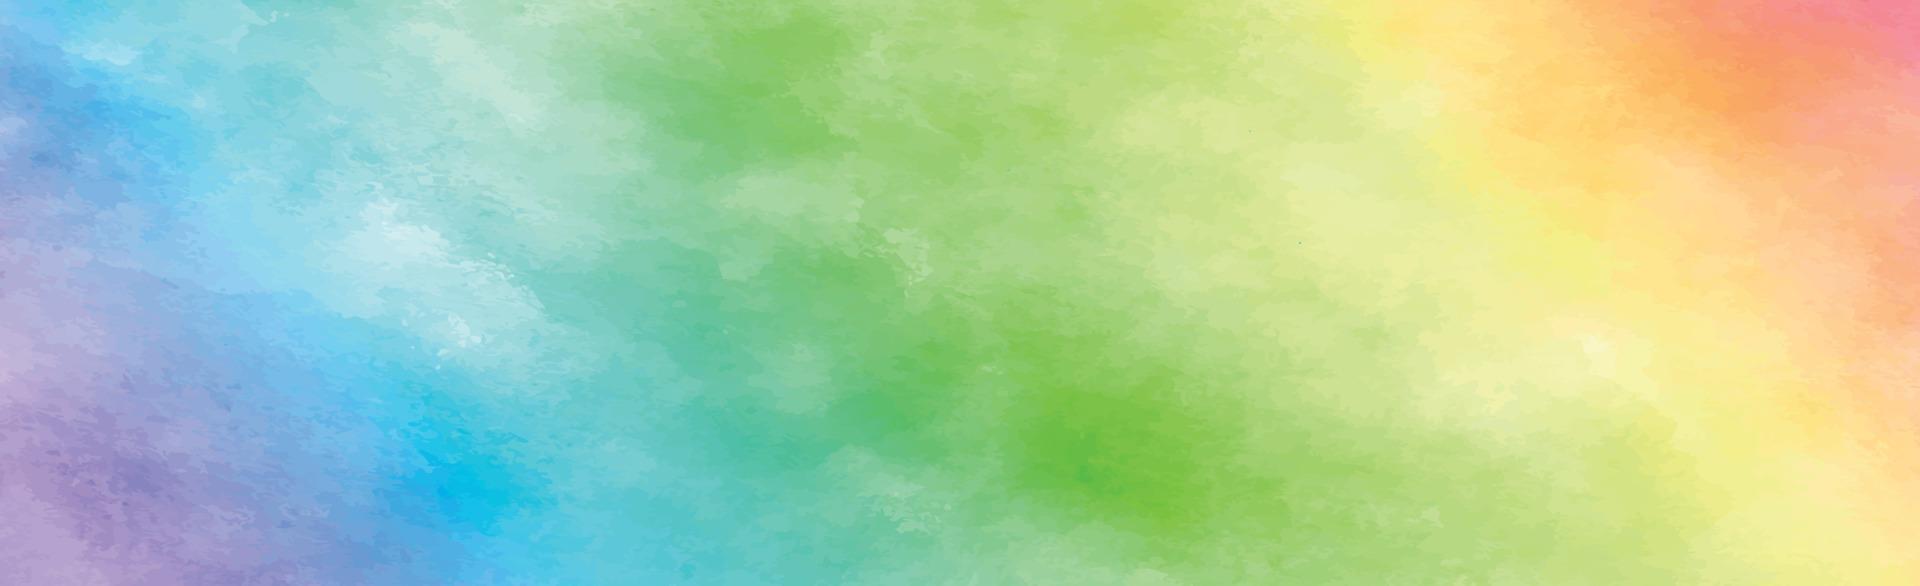 panoramic texture of realistic multi colored watercolor on a white background vector